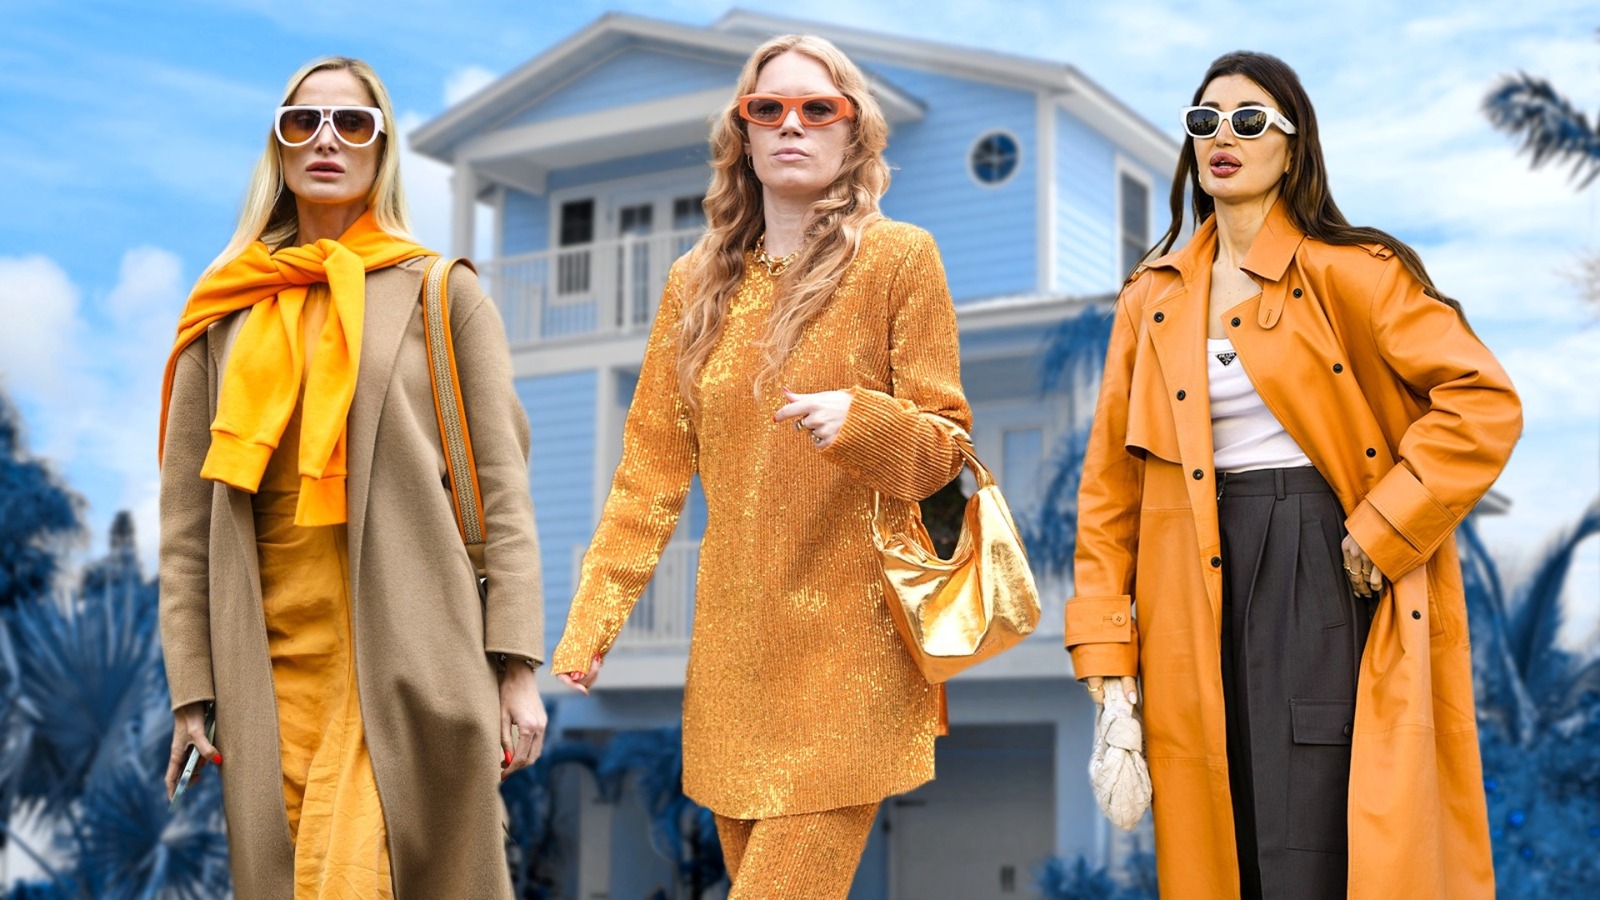 https://www.glam.com/img/gallery/tangerine-orange-is-the-brightest-color-you-can-wear-while-still-giving-quiet-luxury/l-intro-1694010623.jpg